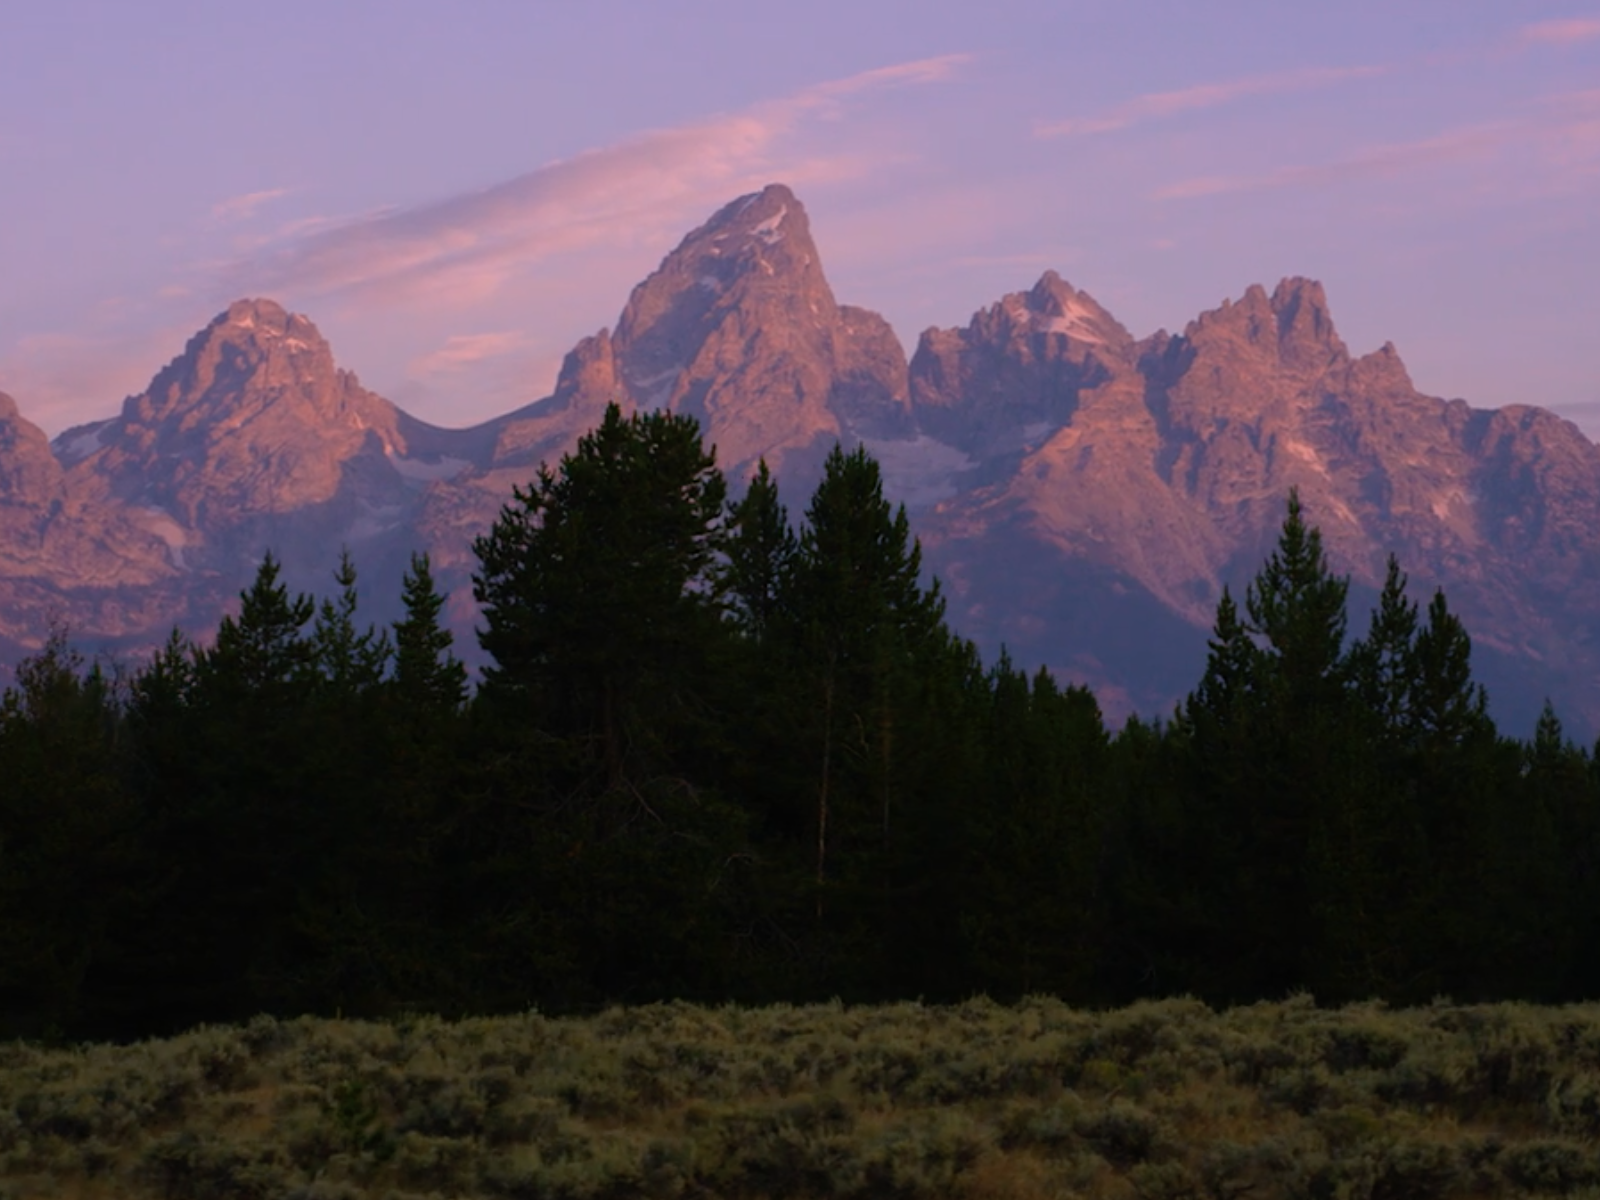 Grant Tetons in the background with pine trees and sagebrush